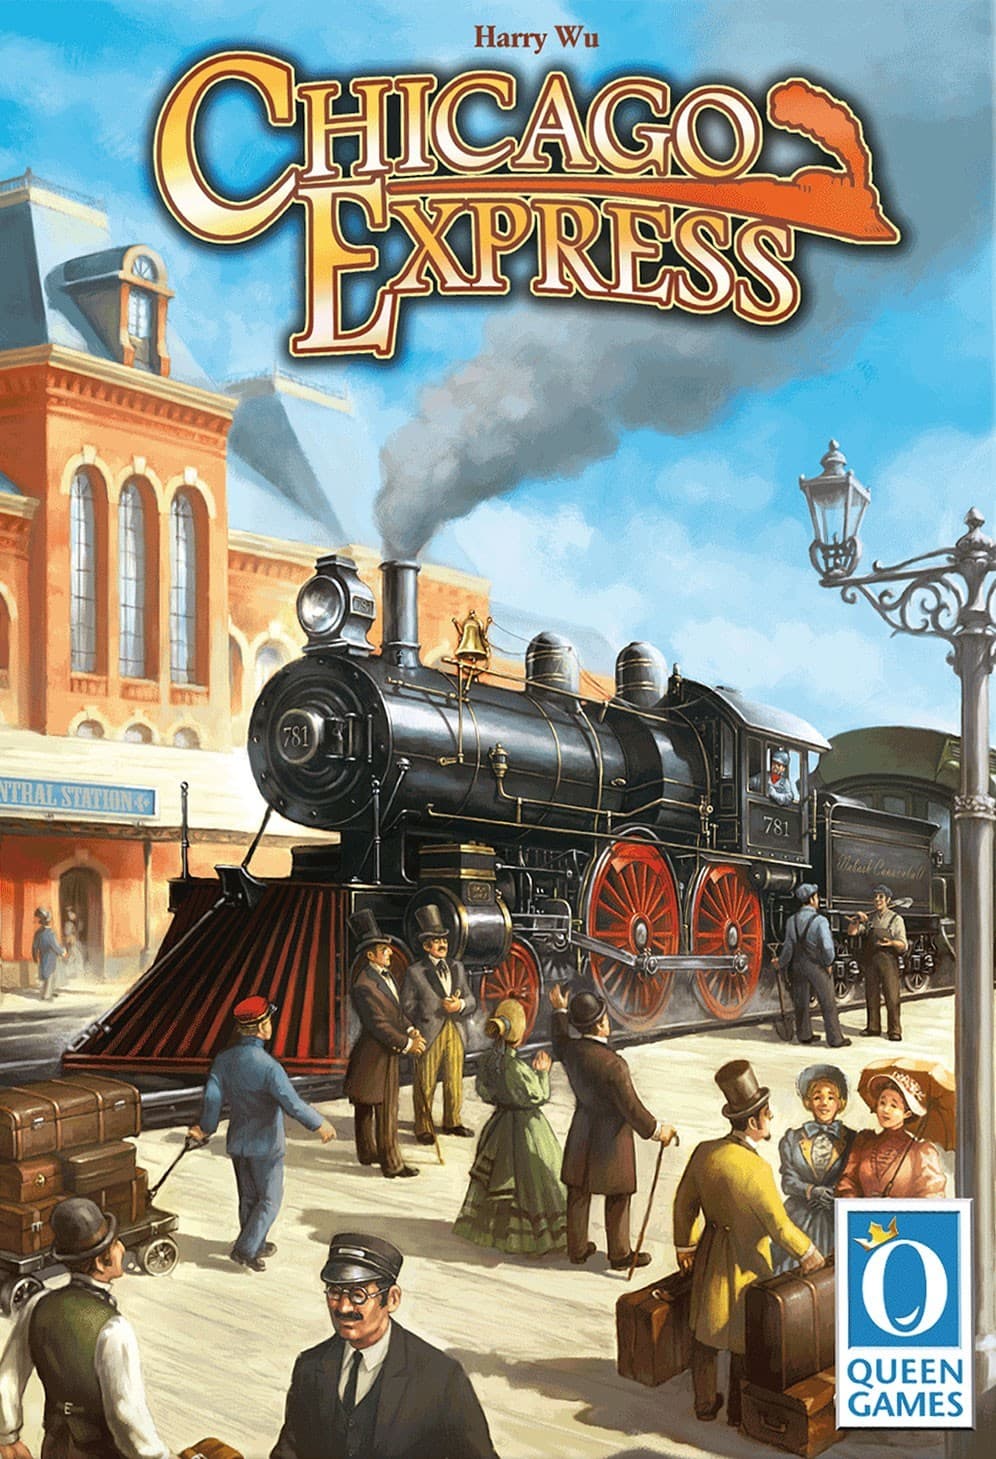 Chicago Express, toujours à l'heure